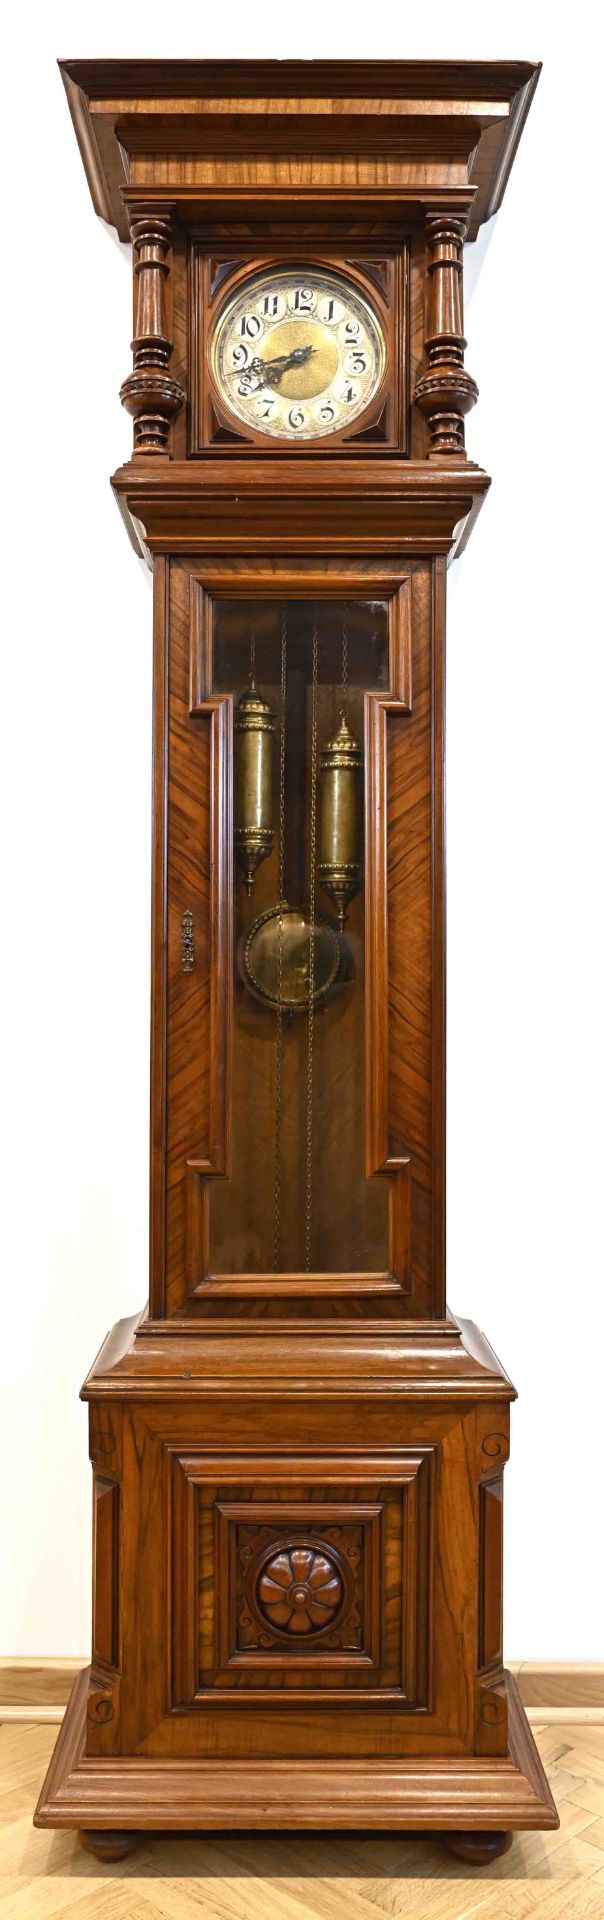 Impressive grandfather clock from the Wilhelminian period, around 1900 in Berlin, solid walnut with